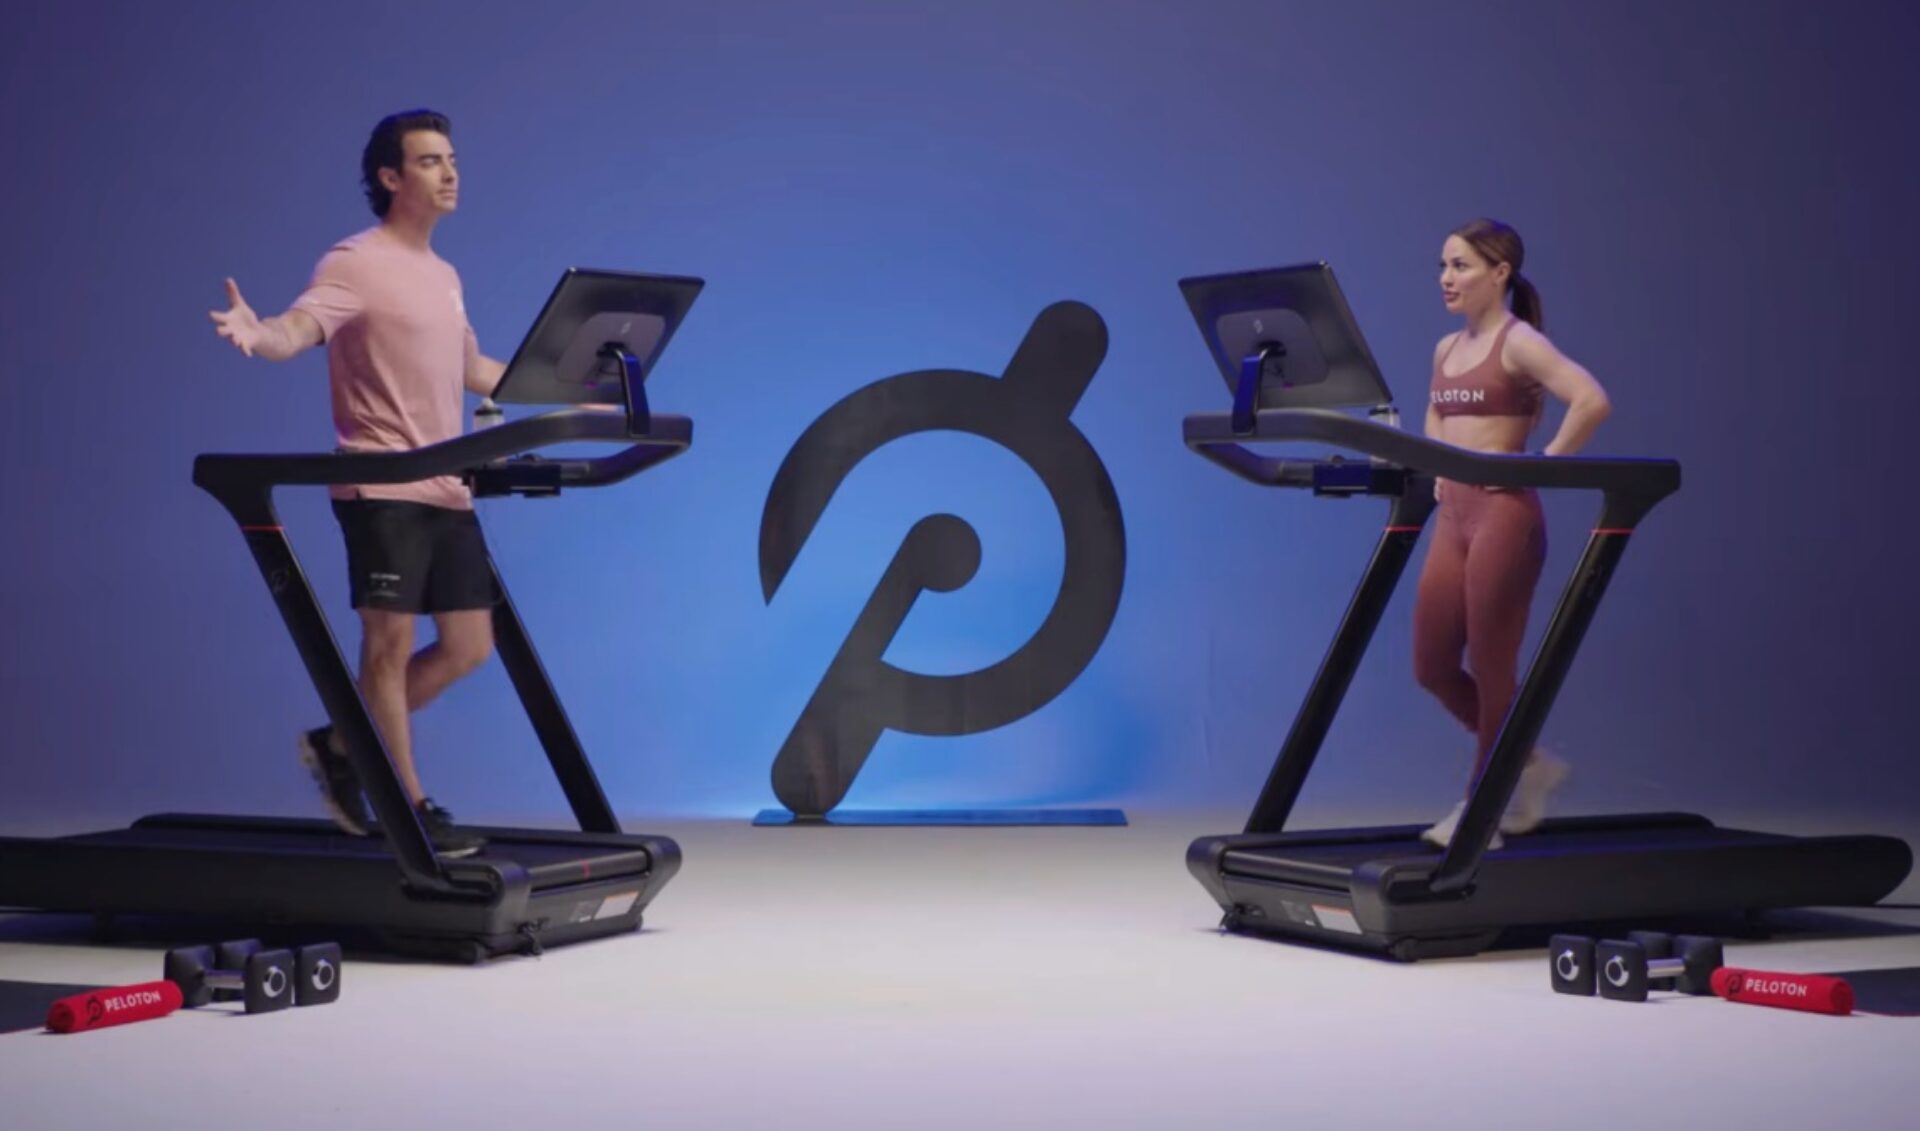 Joe Jonas and Usain Bolt are ‘On The Leaderboard’ in Peloton’s new web series